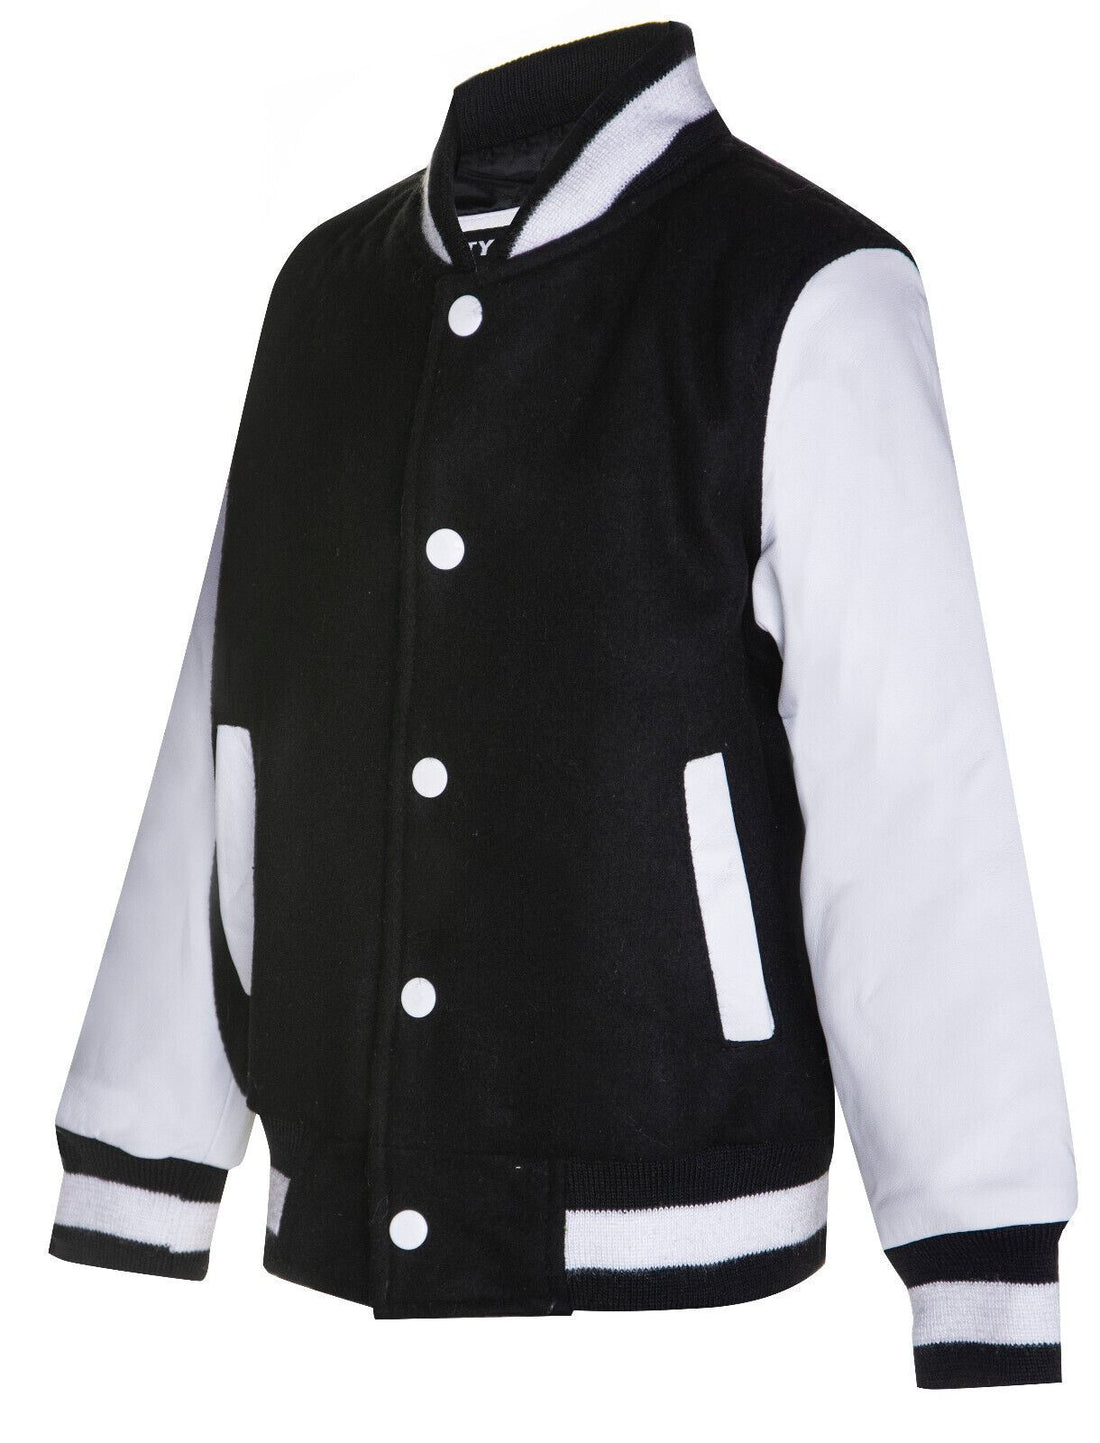 Kids Varsity Bomber Jacket with Real Leather Sleeves 3-13 yrs